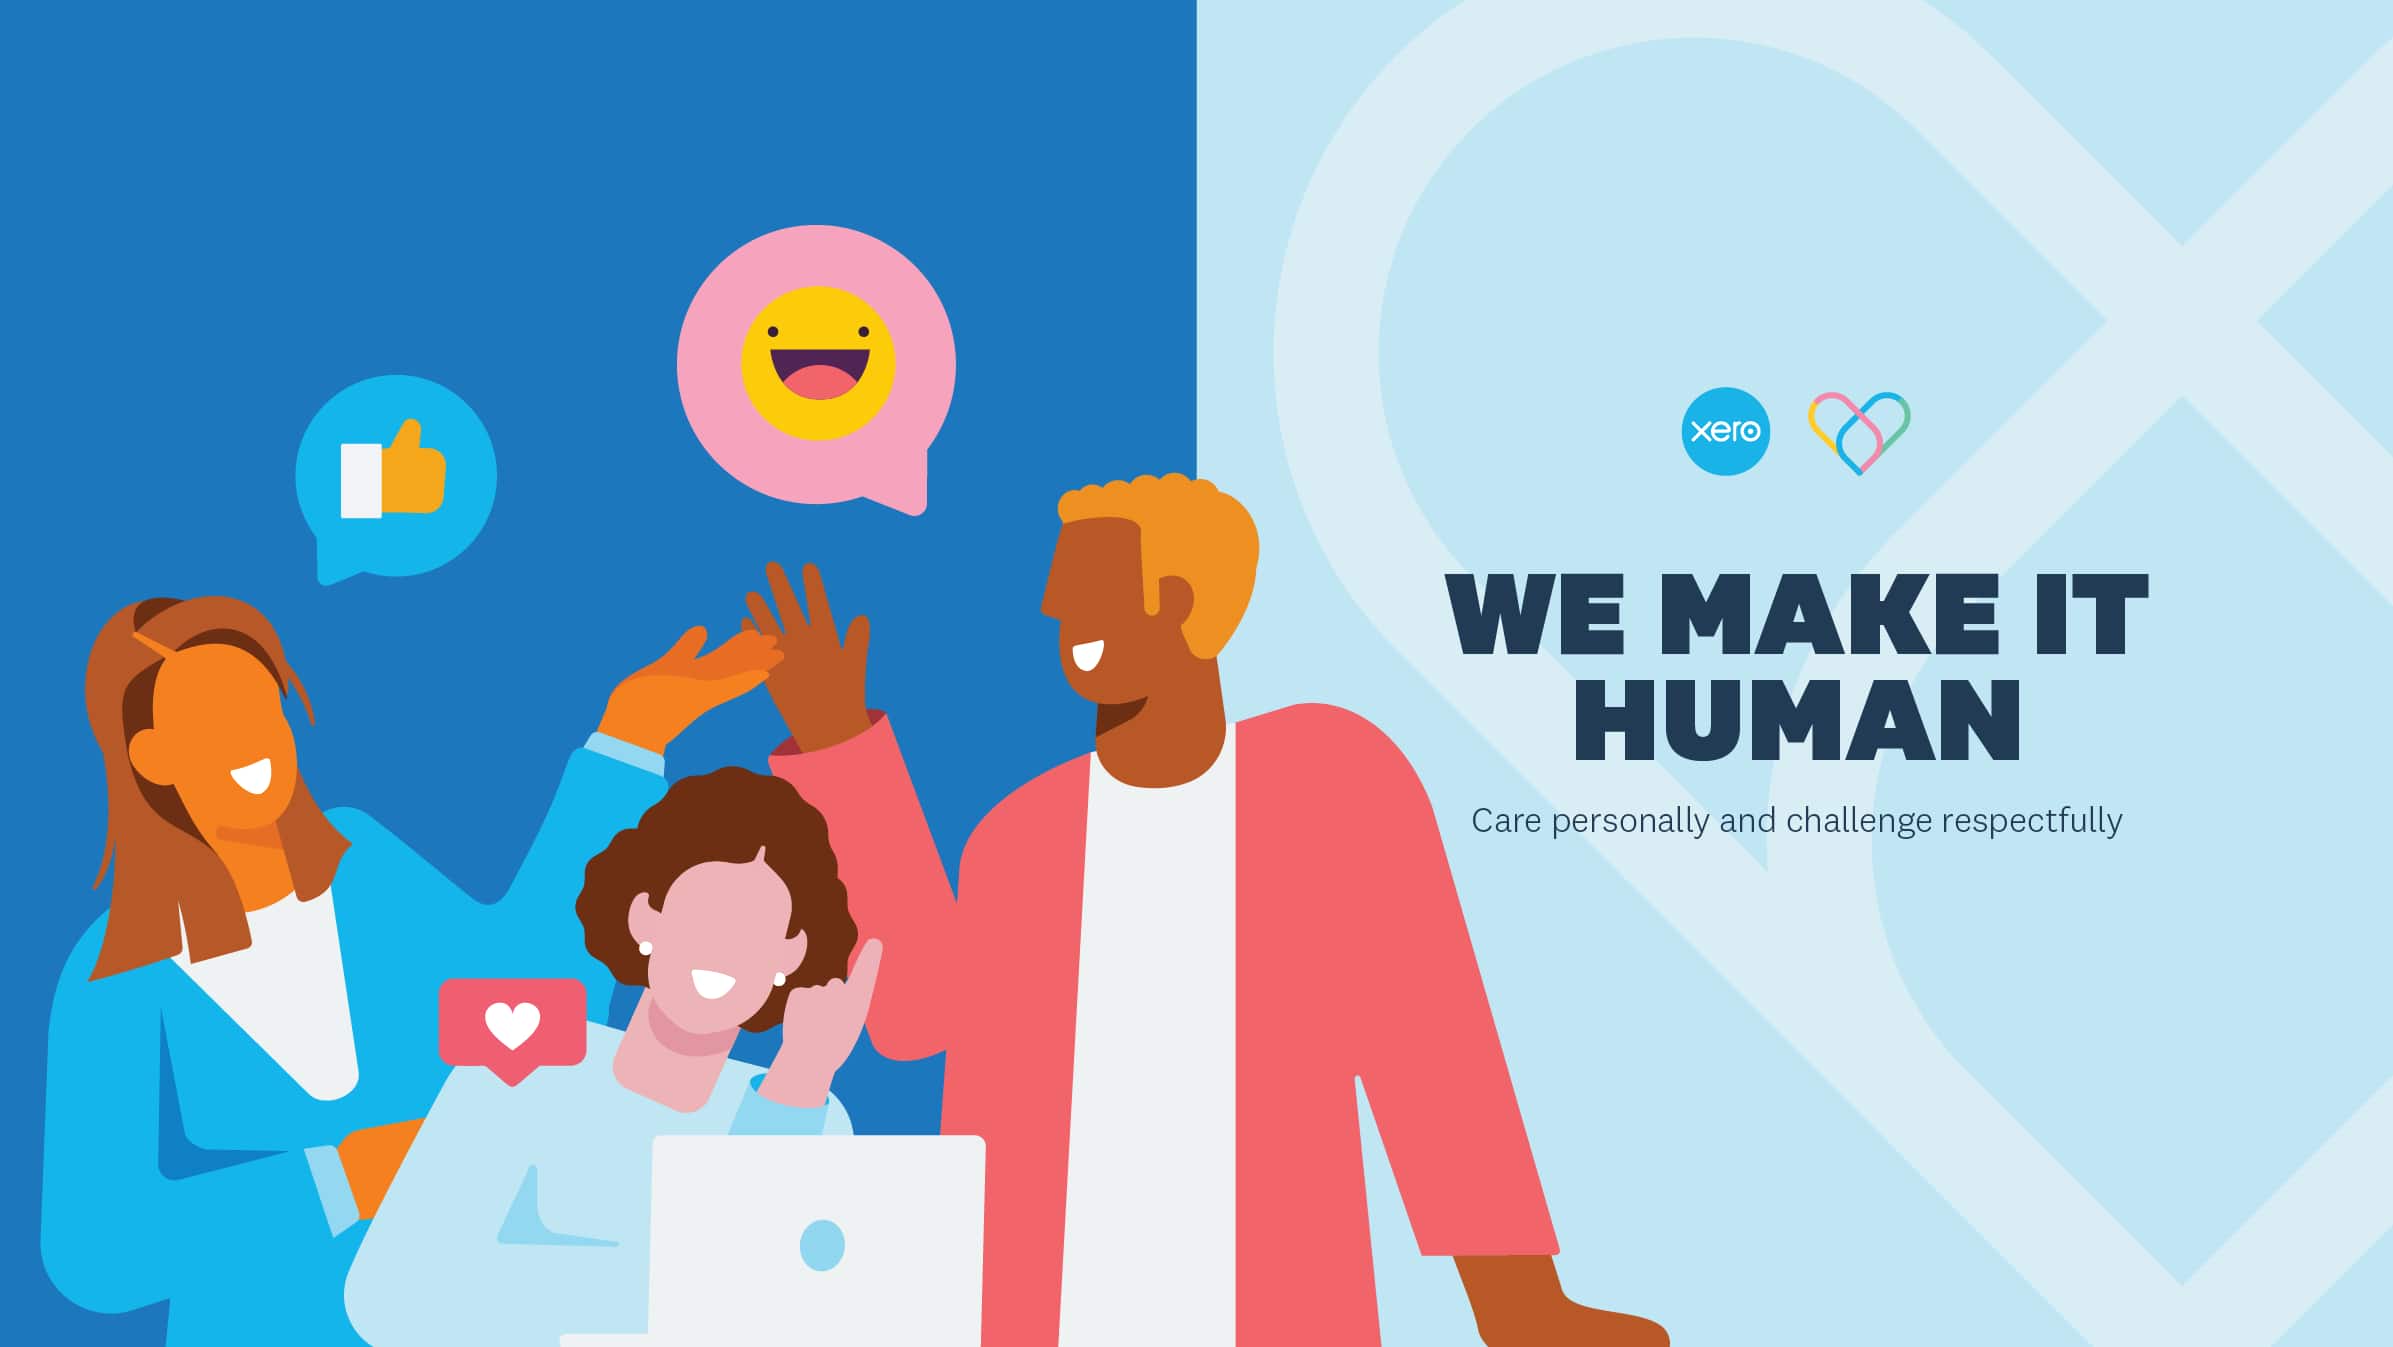 A team works together happily. A poster displays the words of the Xero value, ‘Make it human’ in large print.